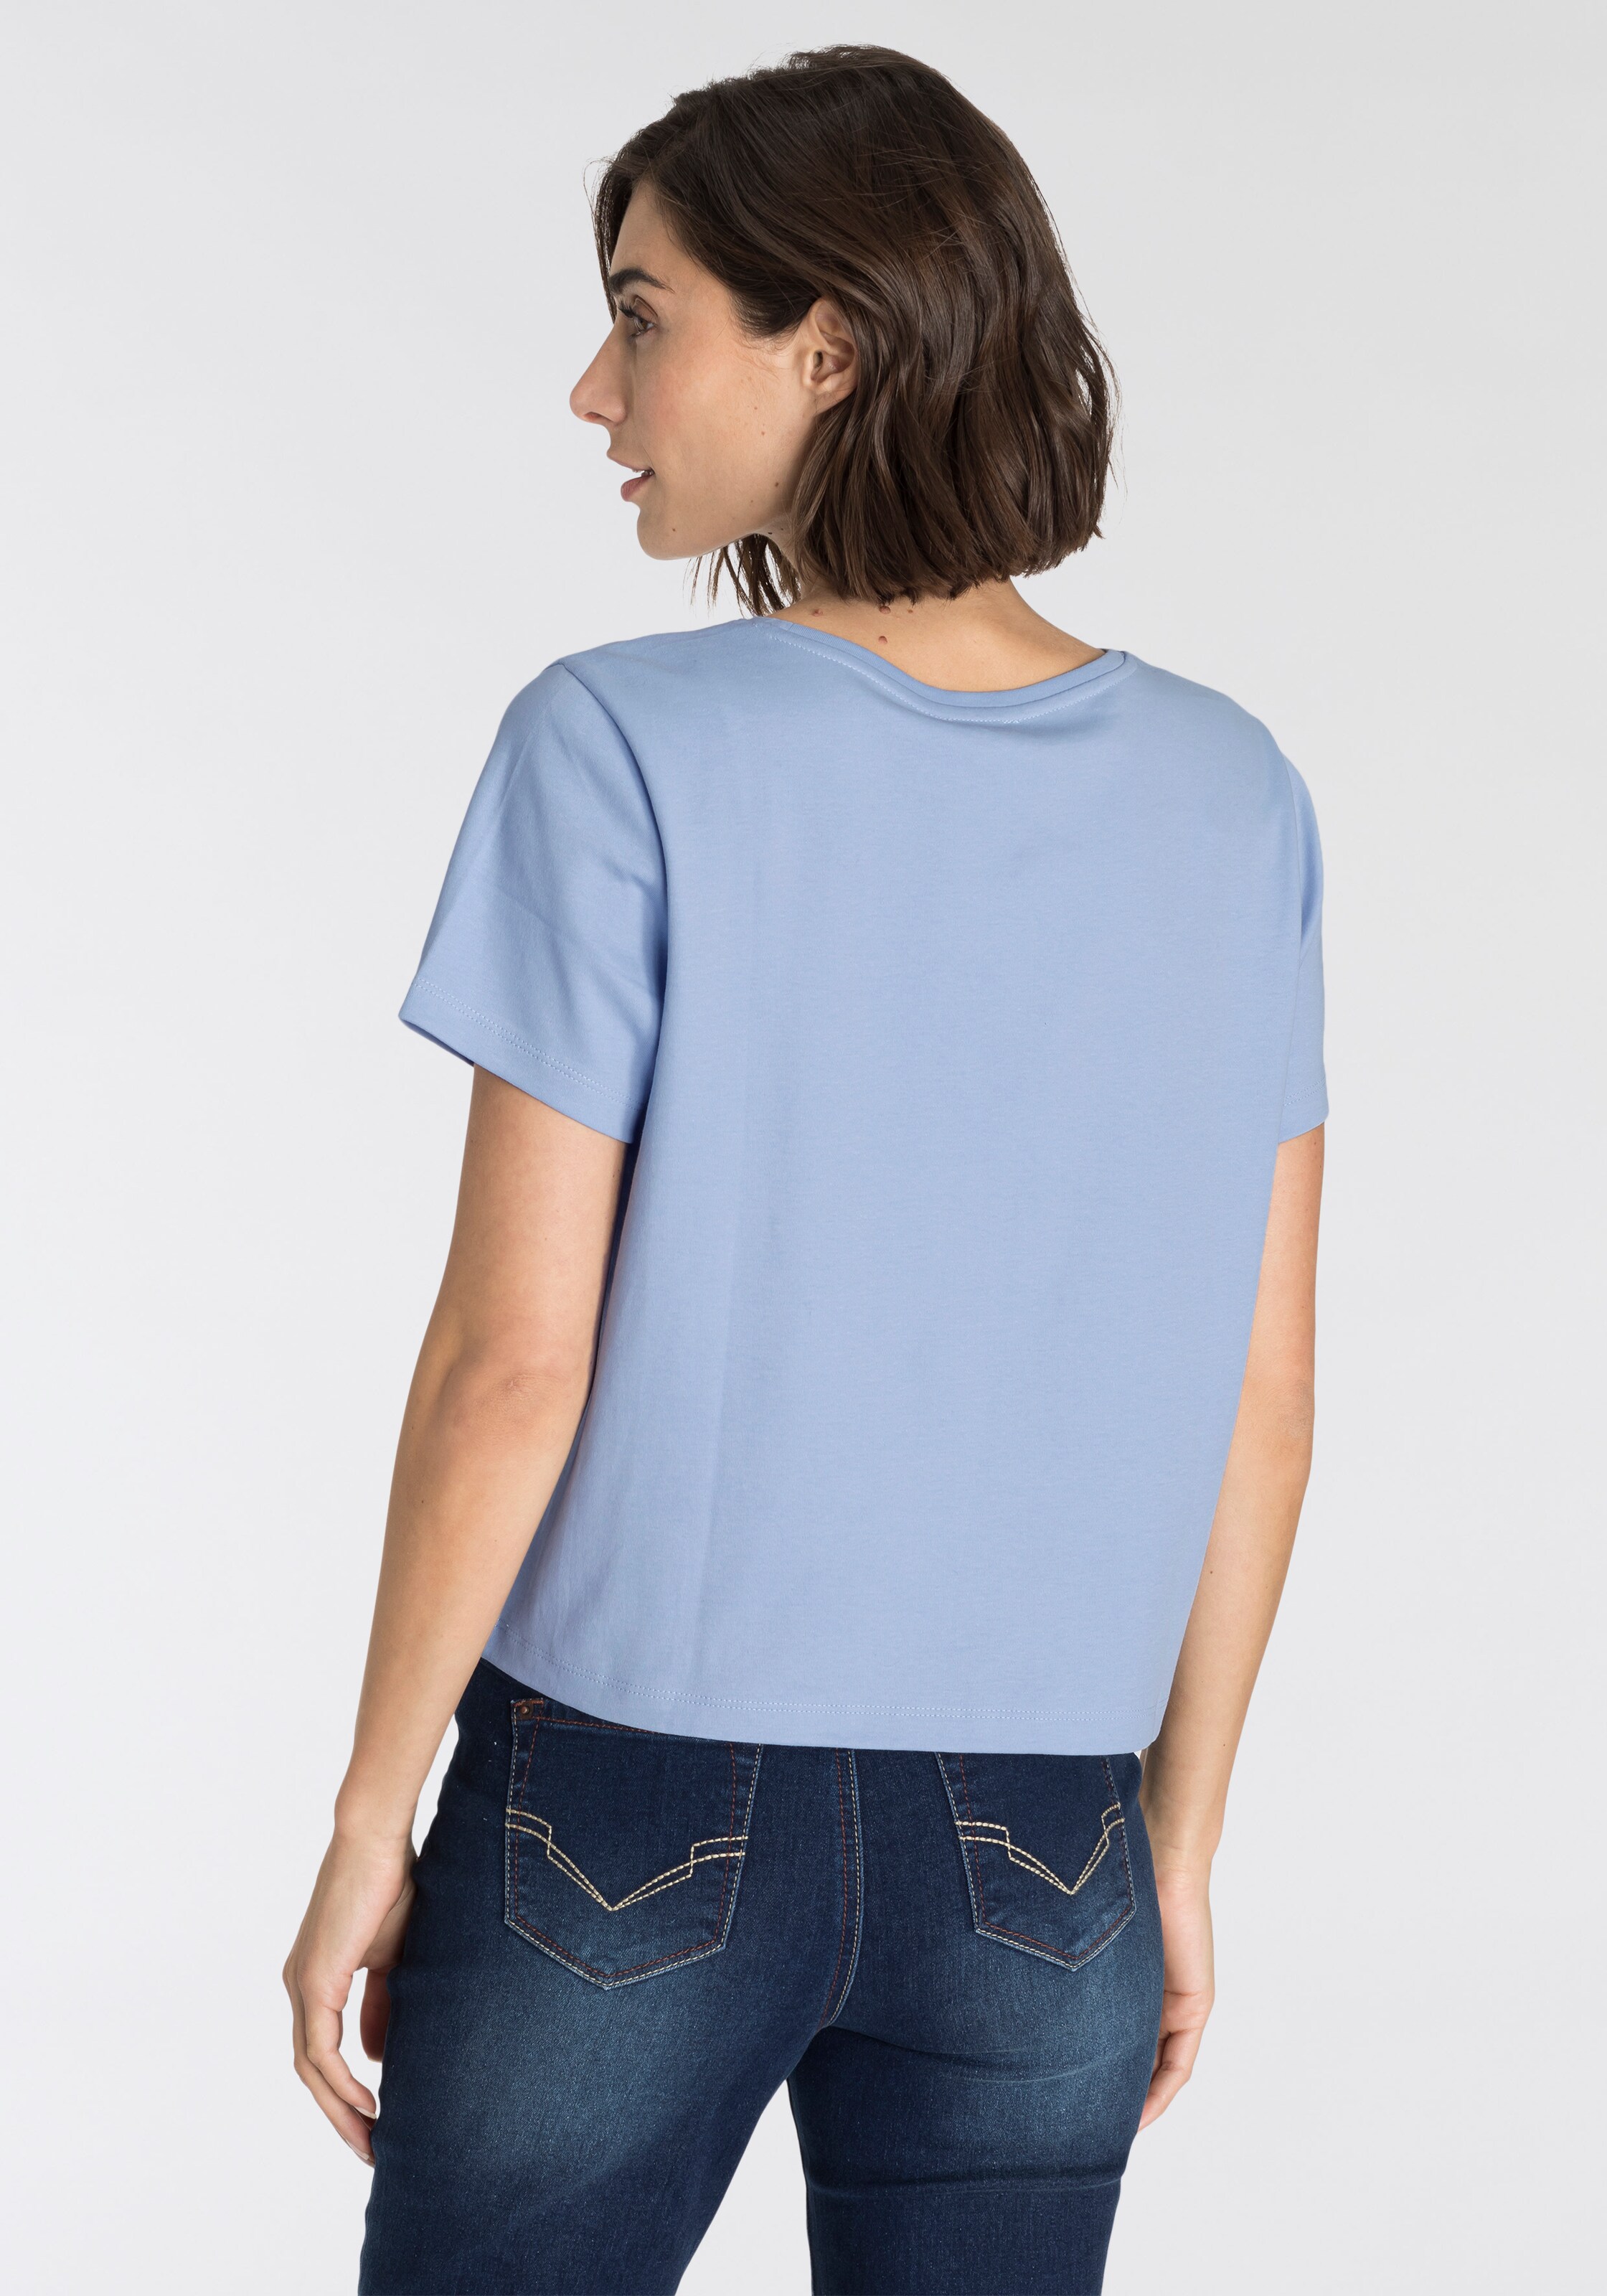 Frauen Shirts & Tops OTTO products Shirt in Hellblau - MS26130